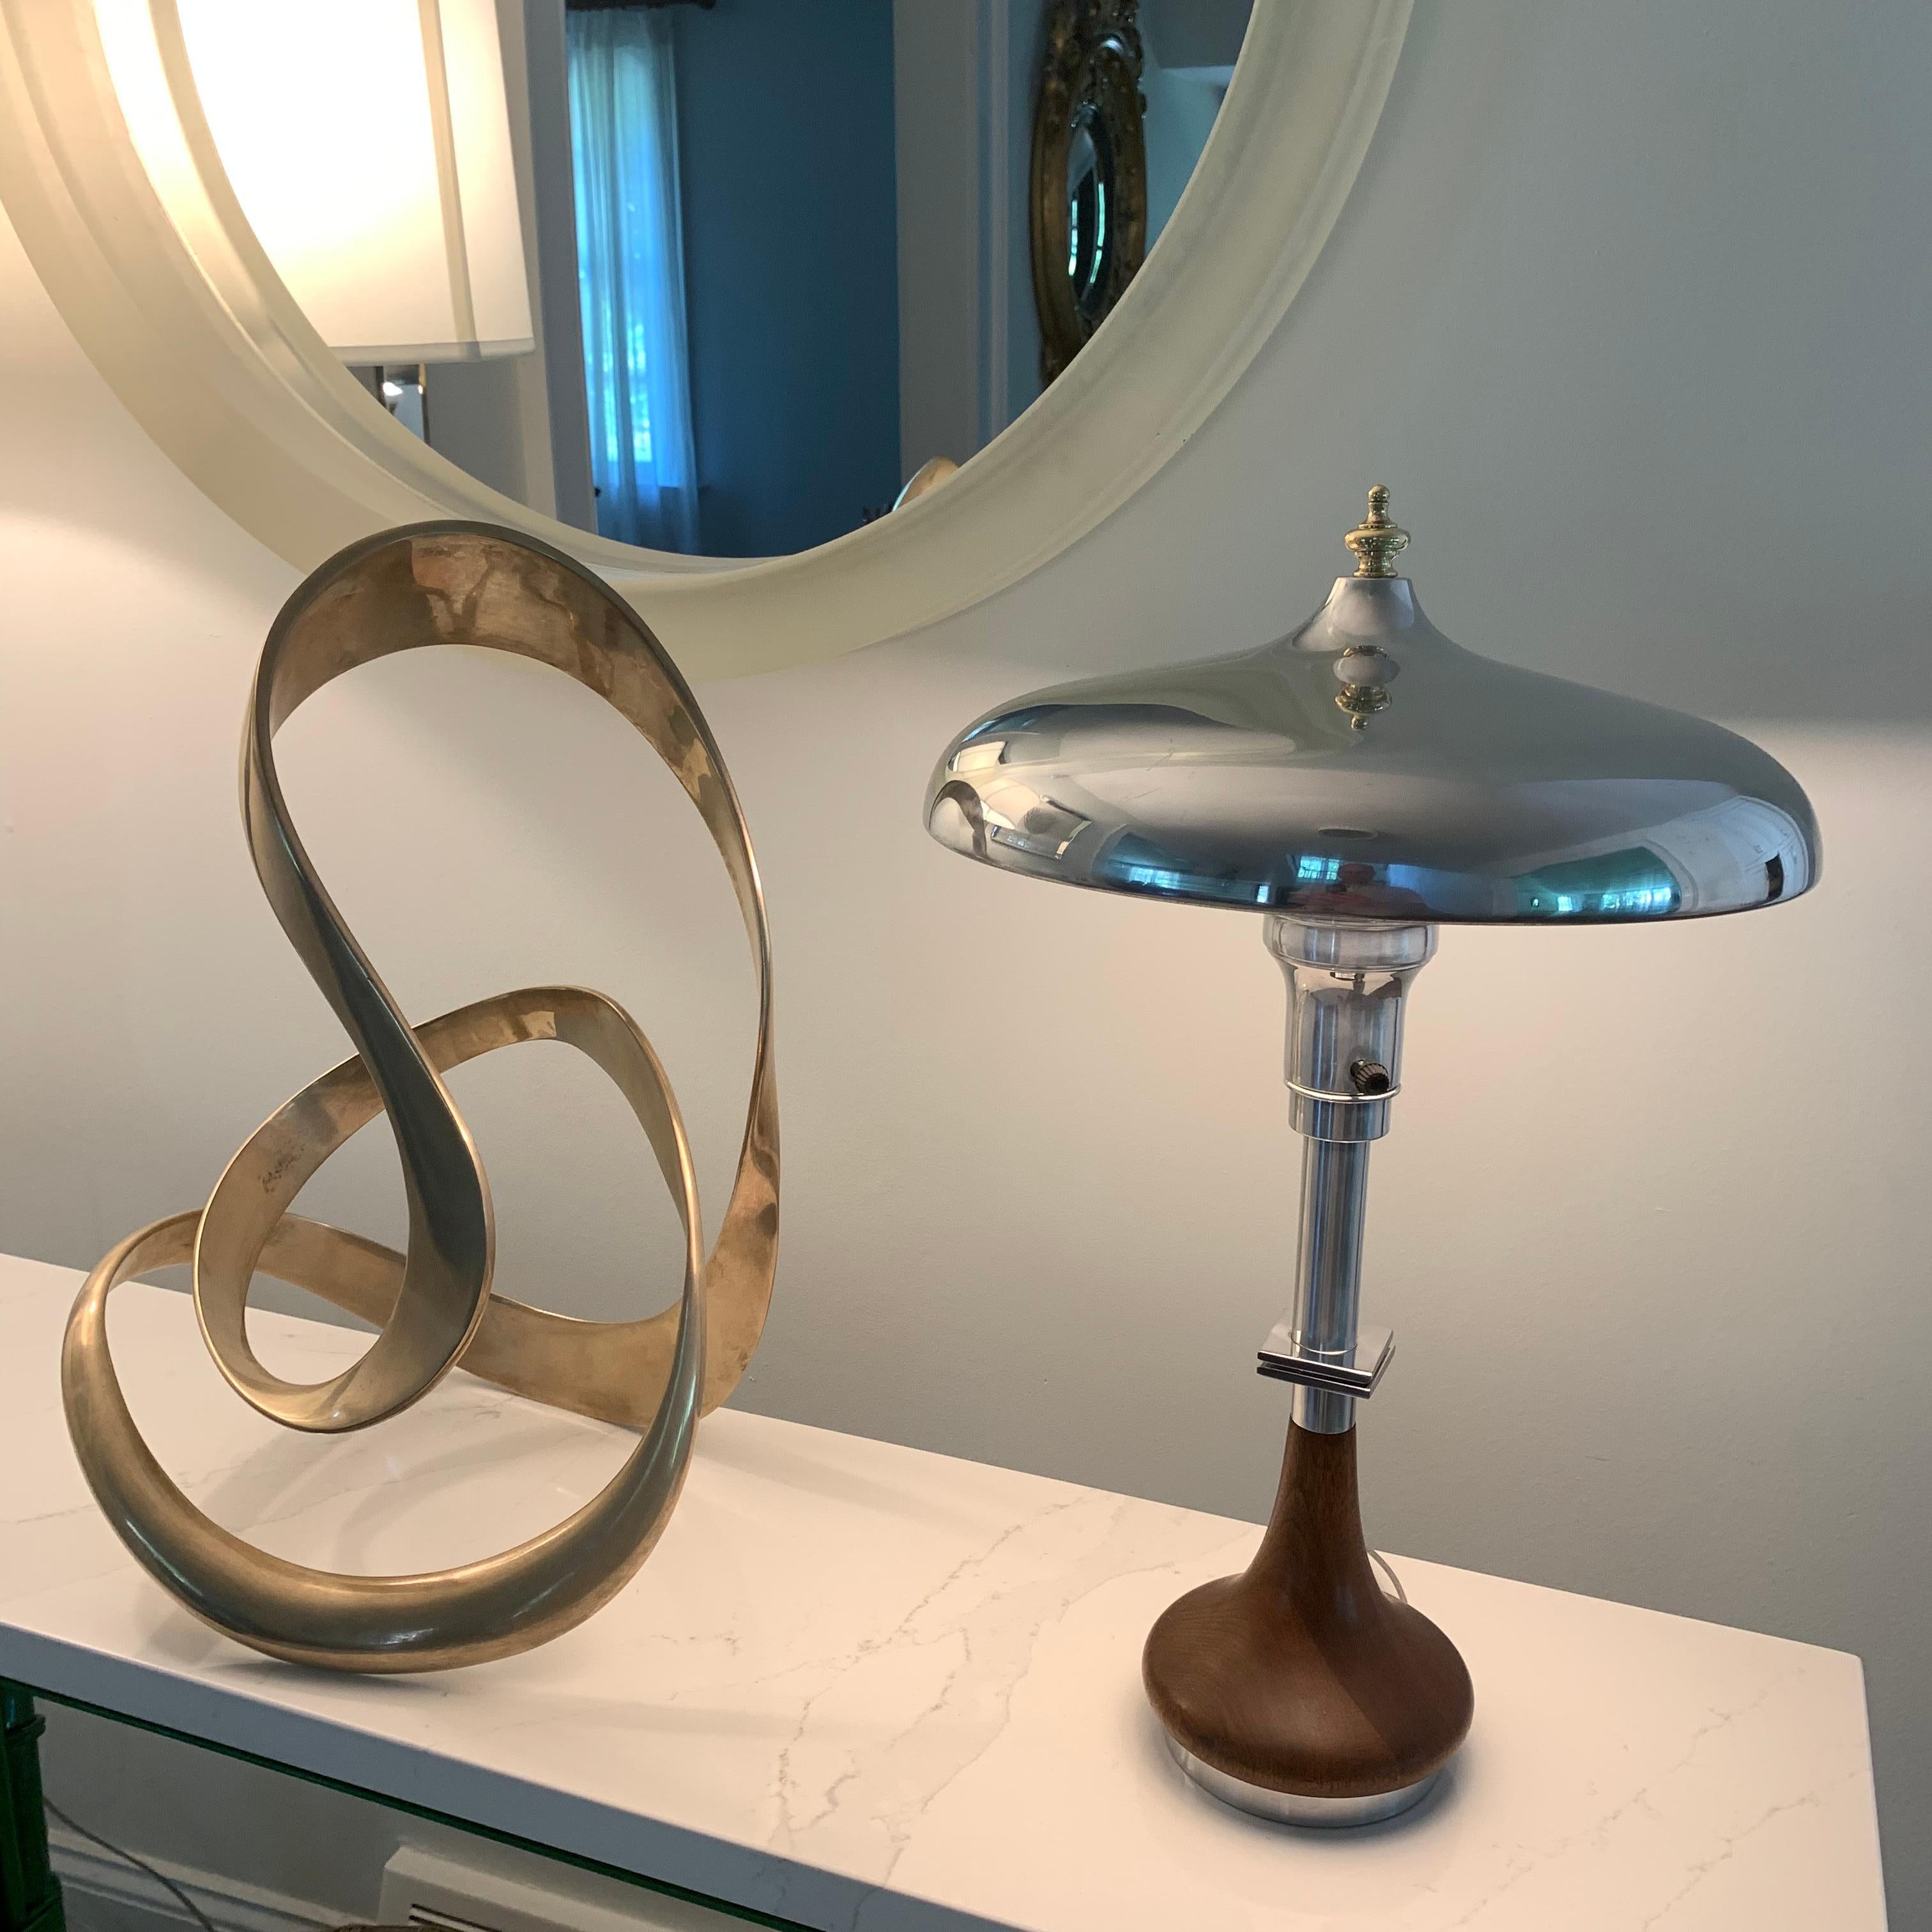 Polished Scandinavian Art Deco Table Lamp With Chrome Shade And Solid Brass Finial